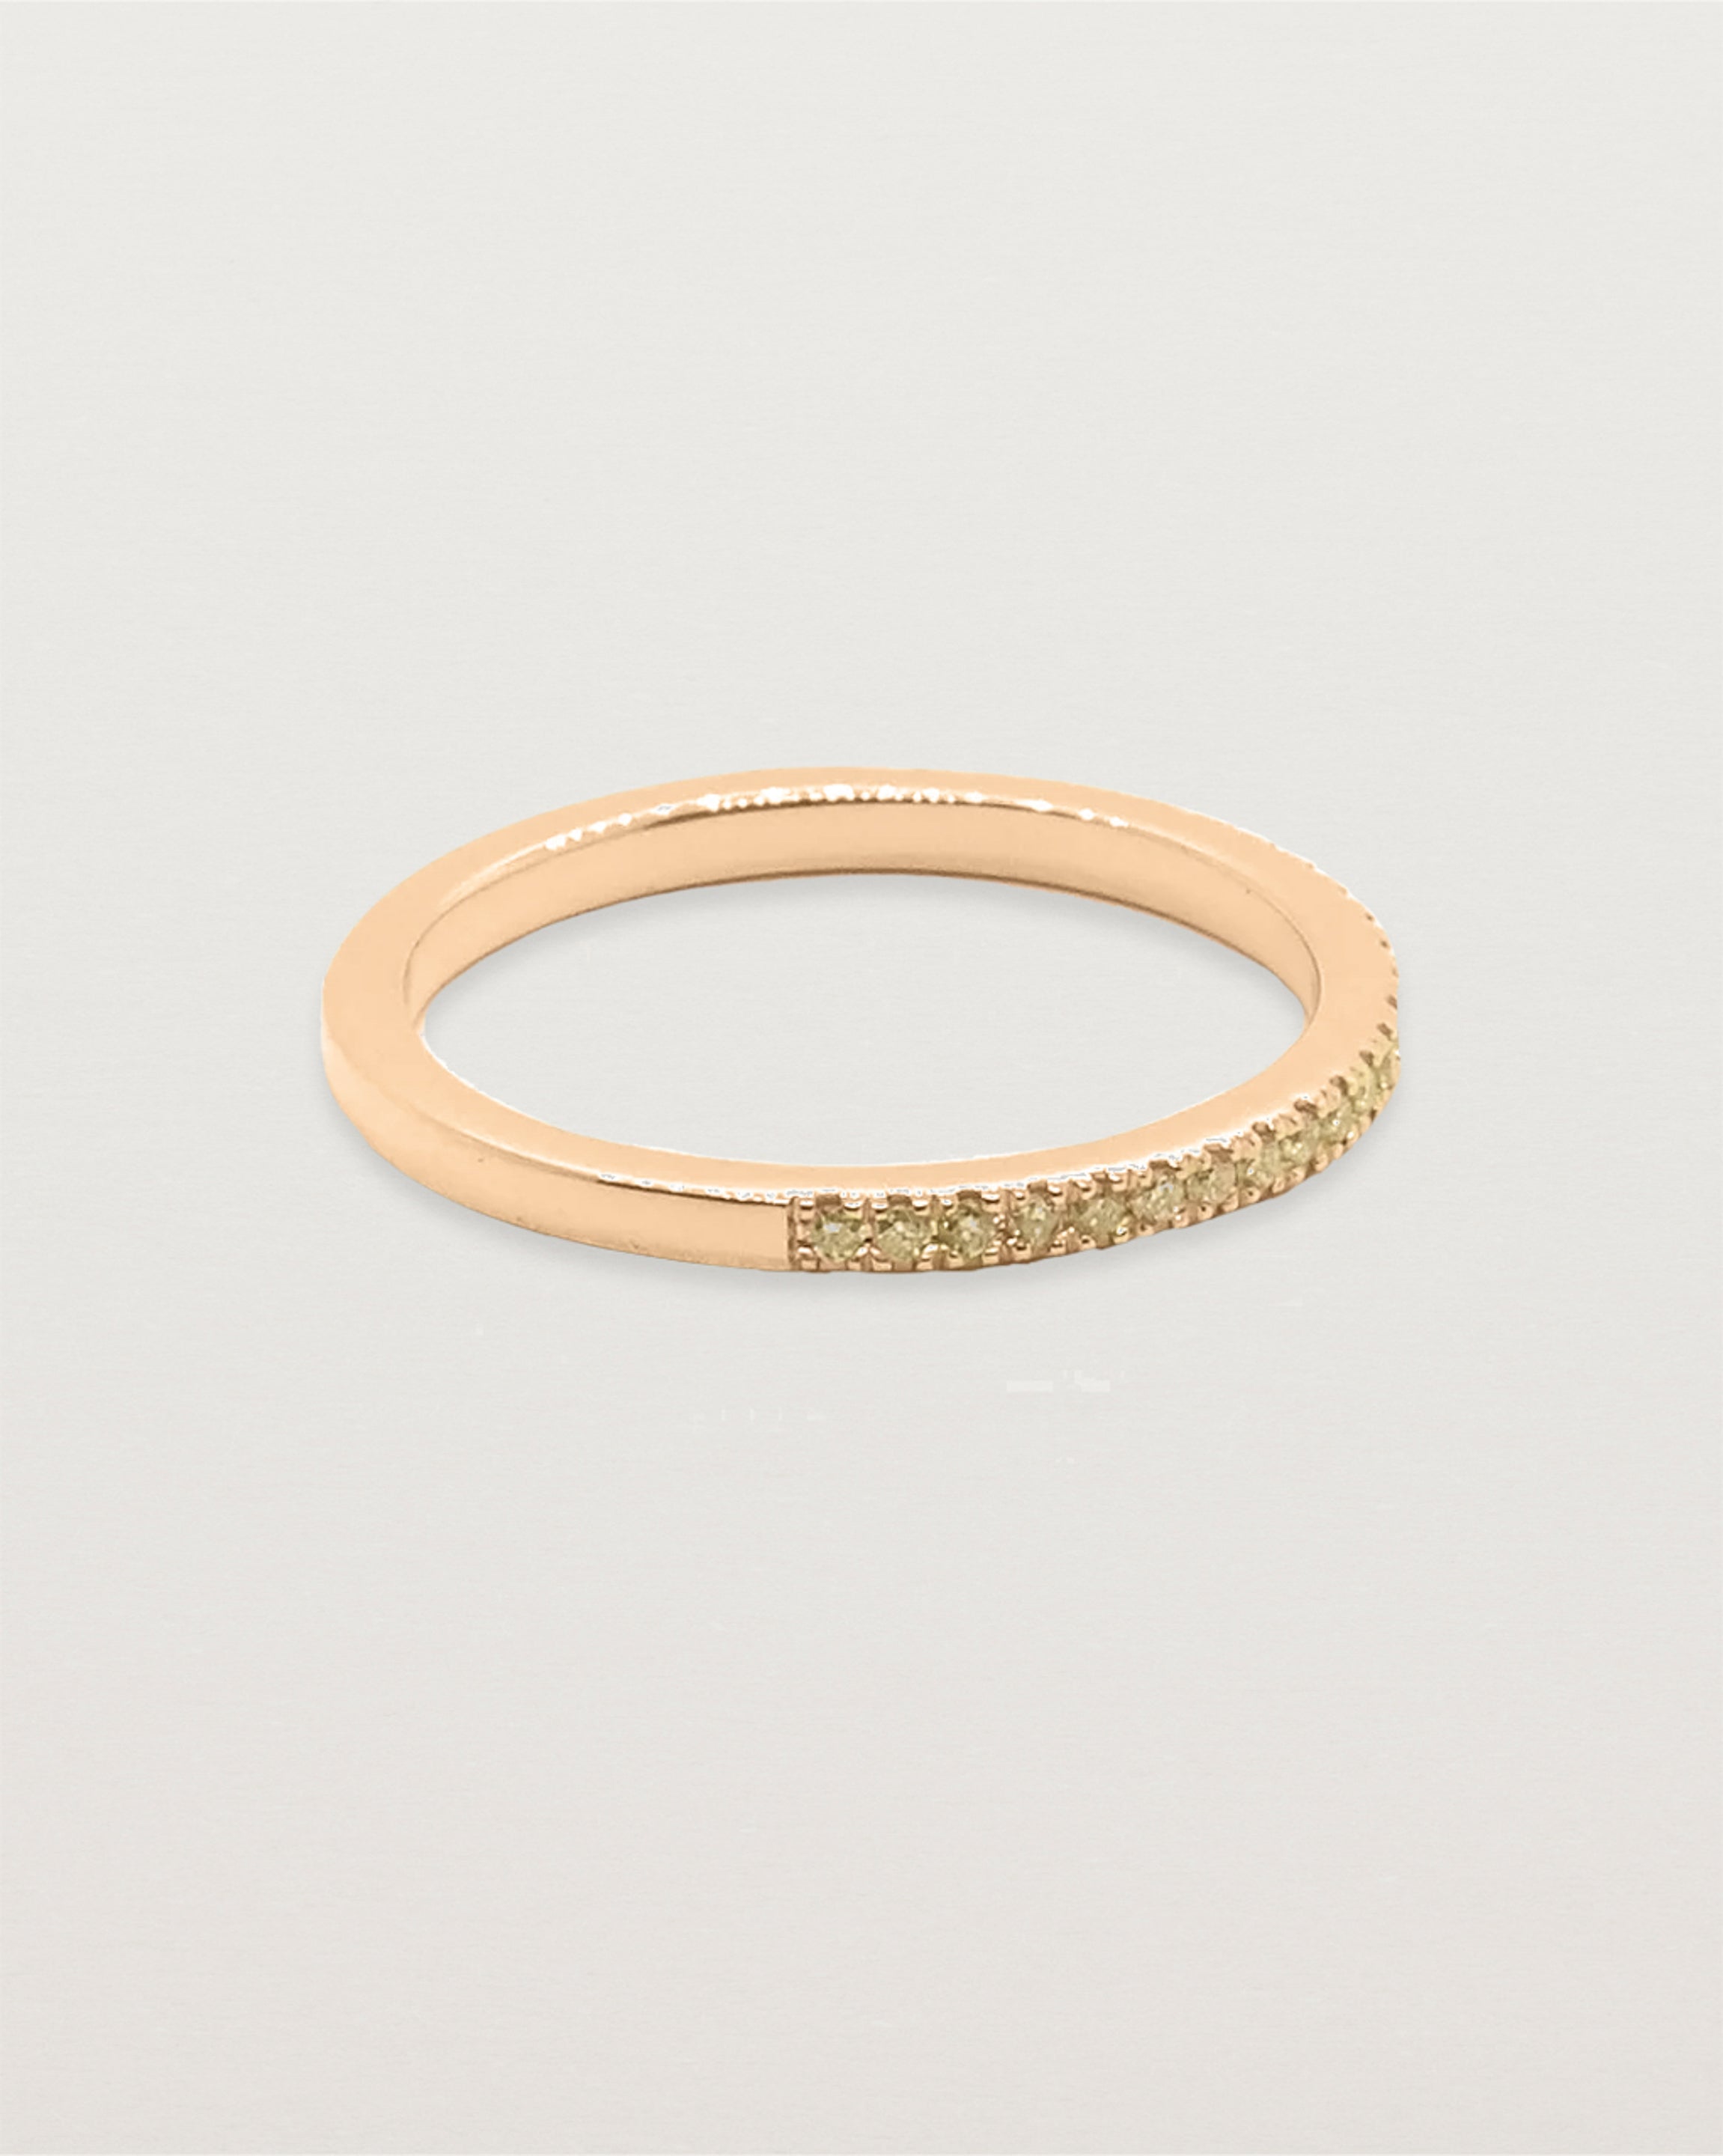 A half band of champagne diamonds set in a rose gold band